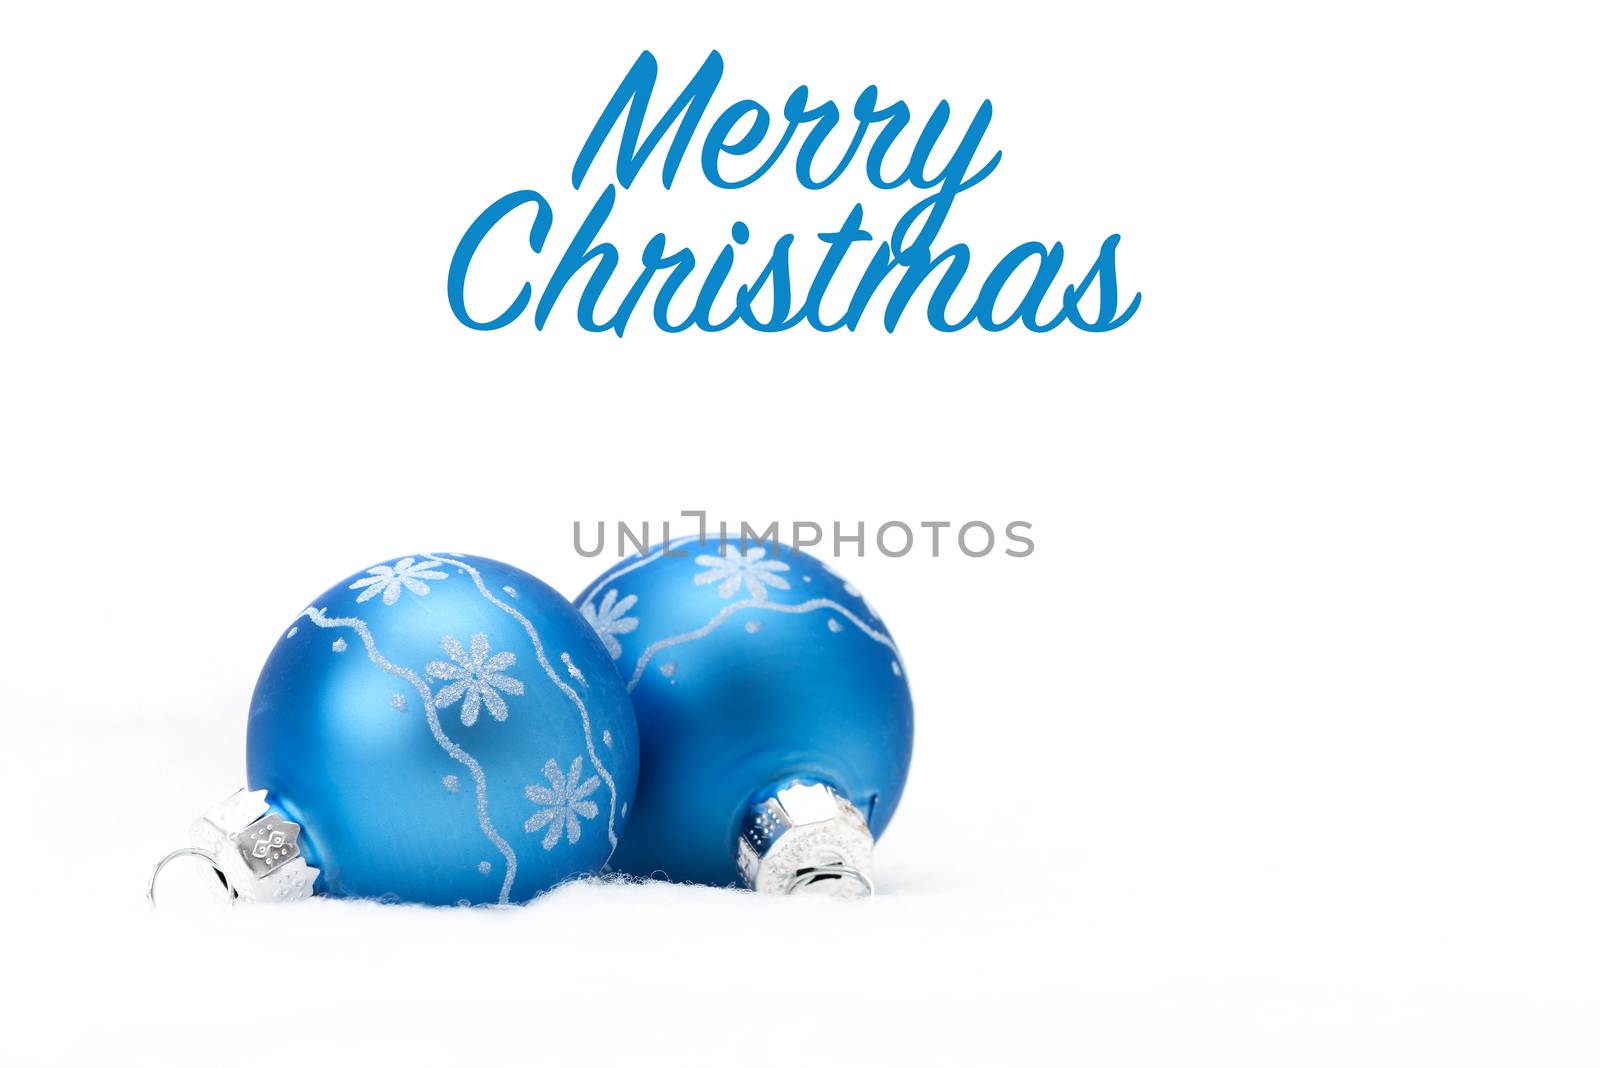 Glass Christmas Ornaments by billberryphotography